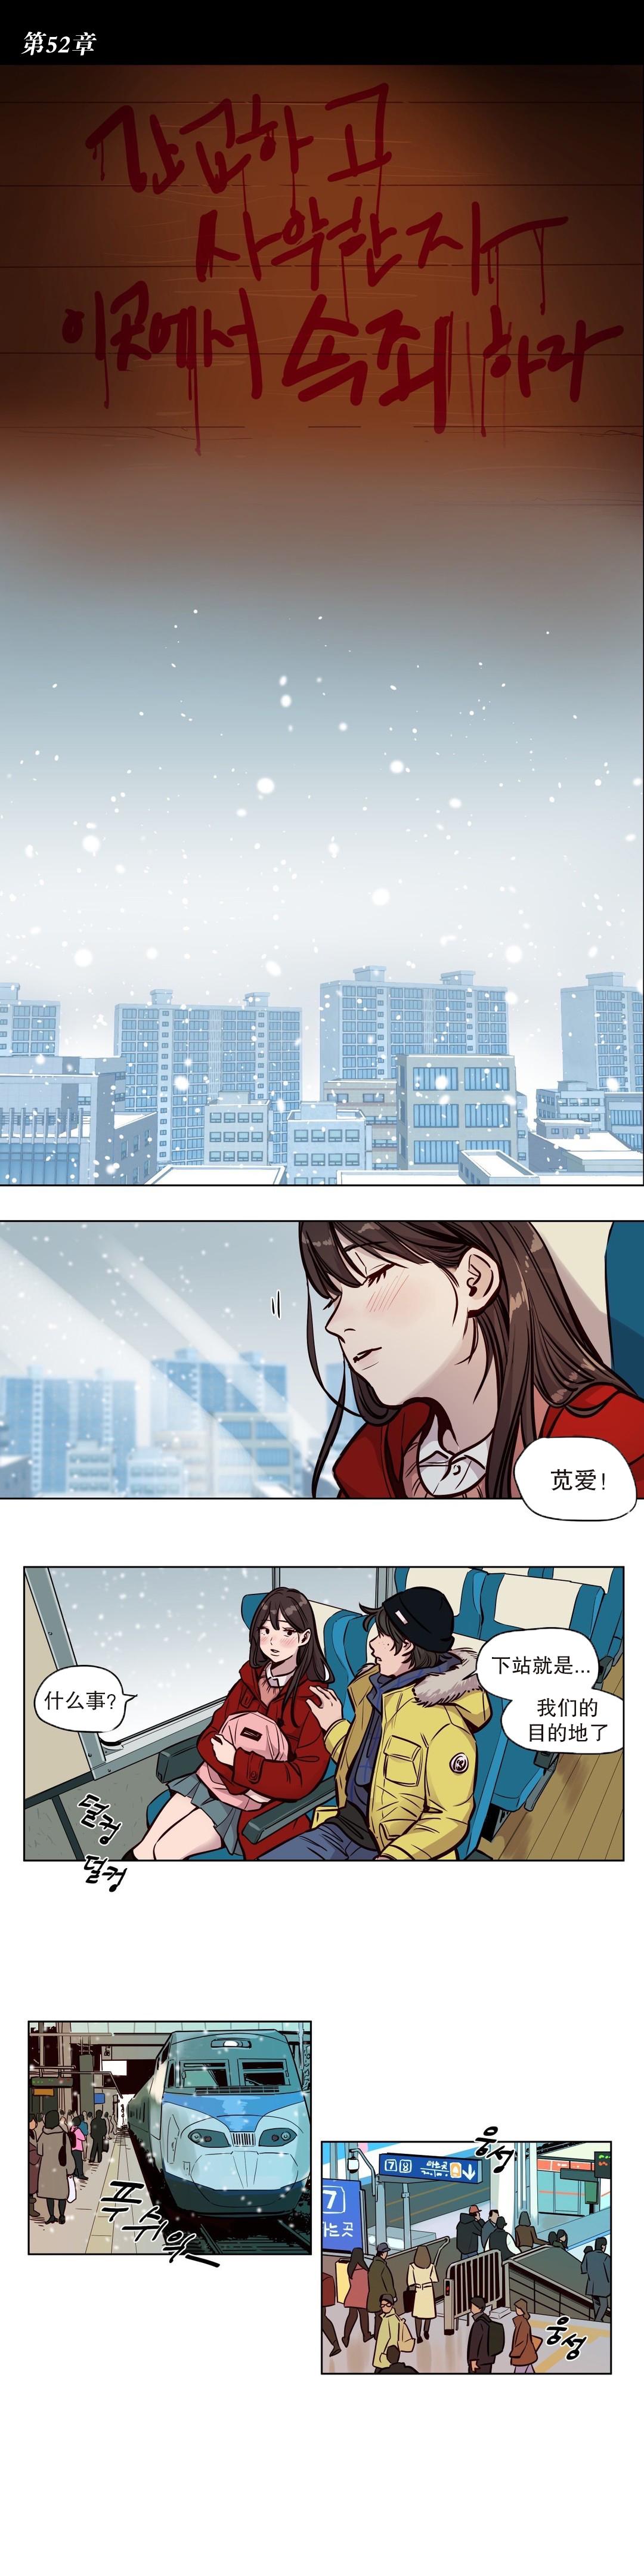 [Ramjak] 赎罪营(Atonement Camp) Ch.50-52 (Chinese) 24